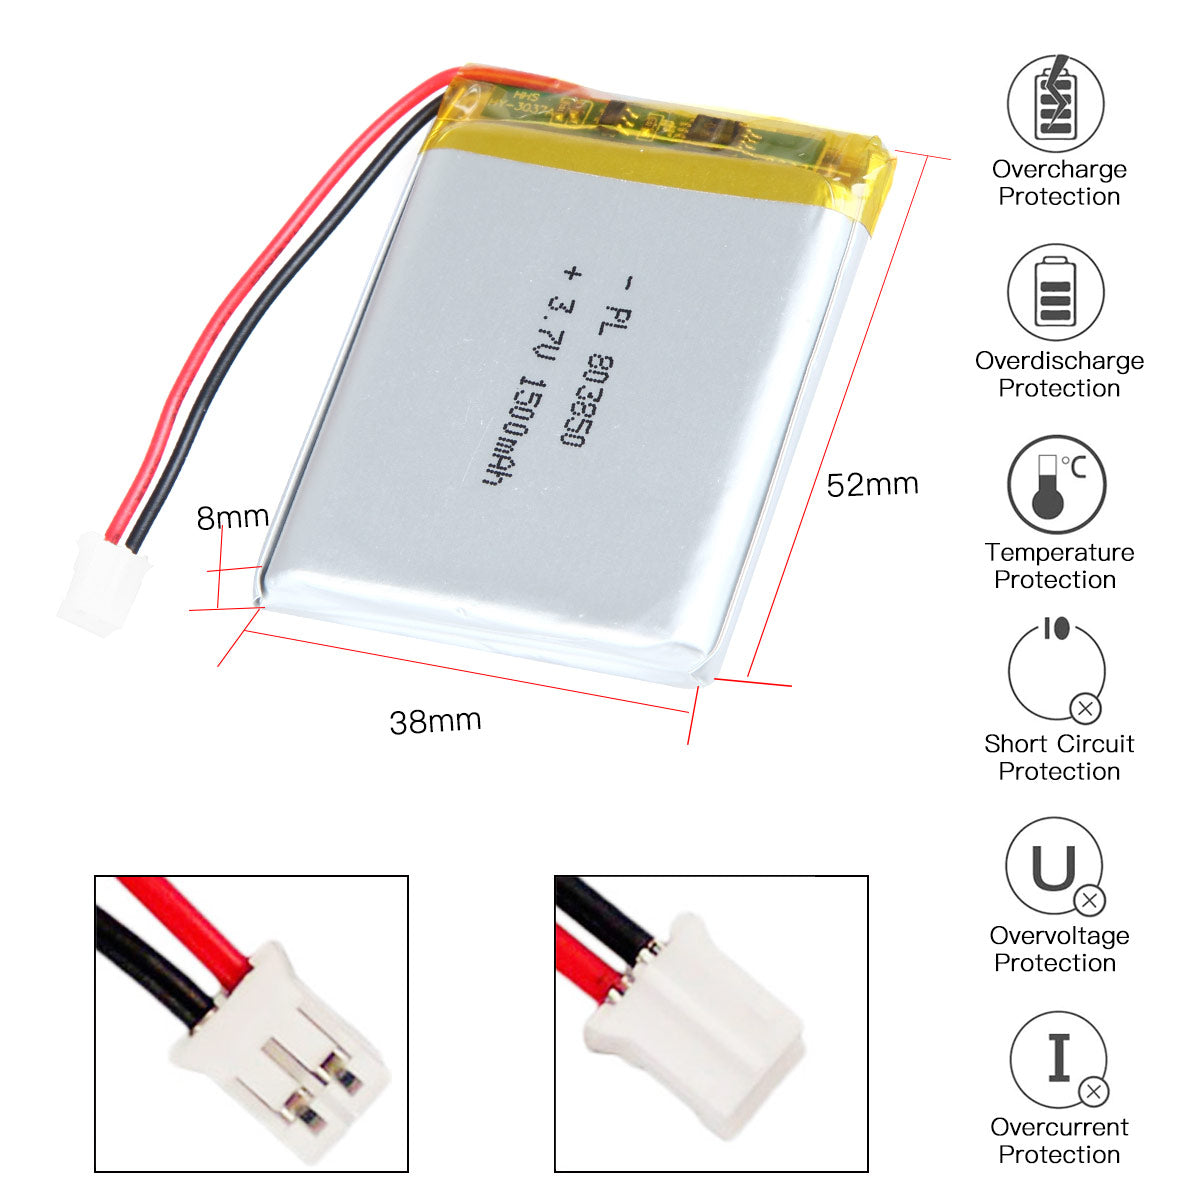 YDL 3.7V 1500mAh 803850 Rechargeable Lithium Polymer Battery